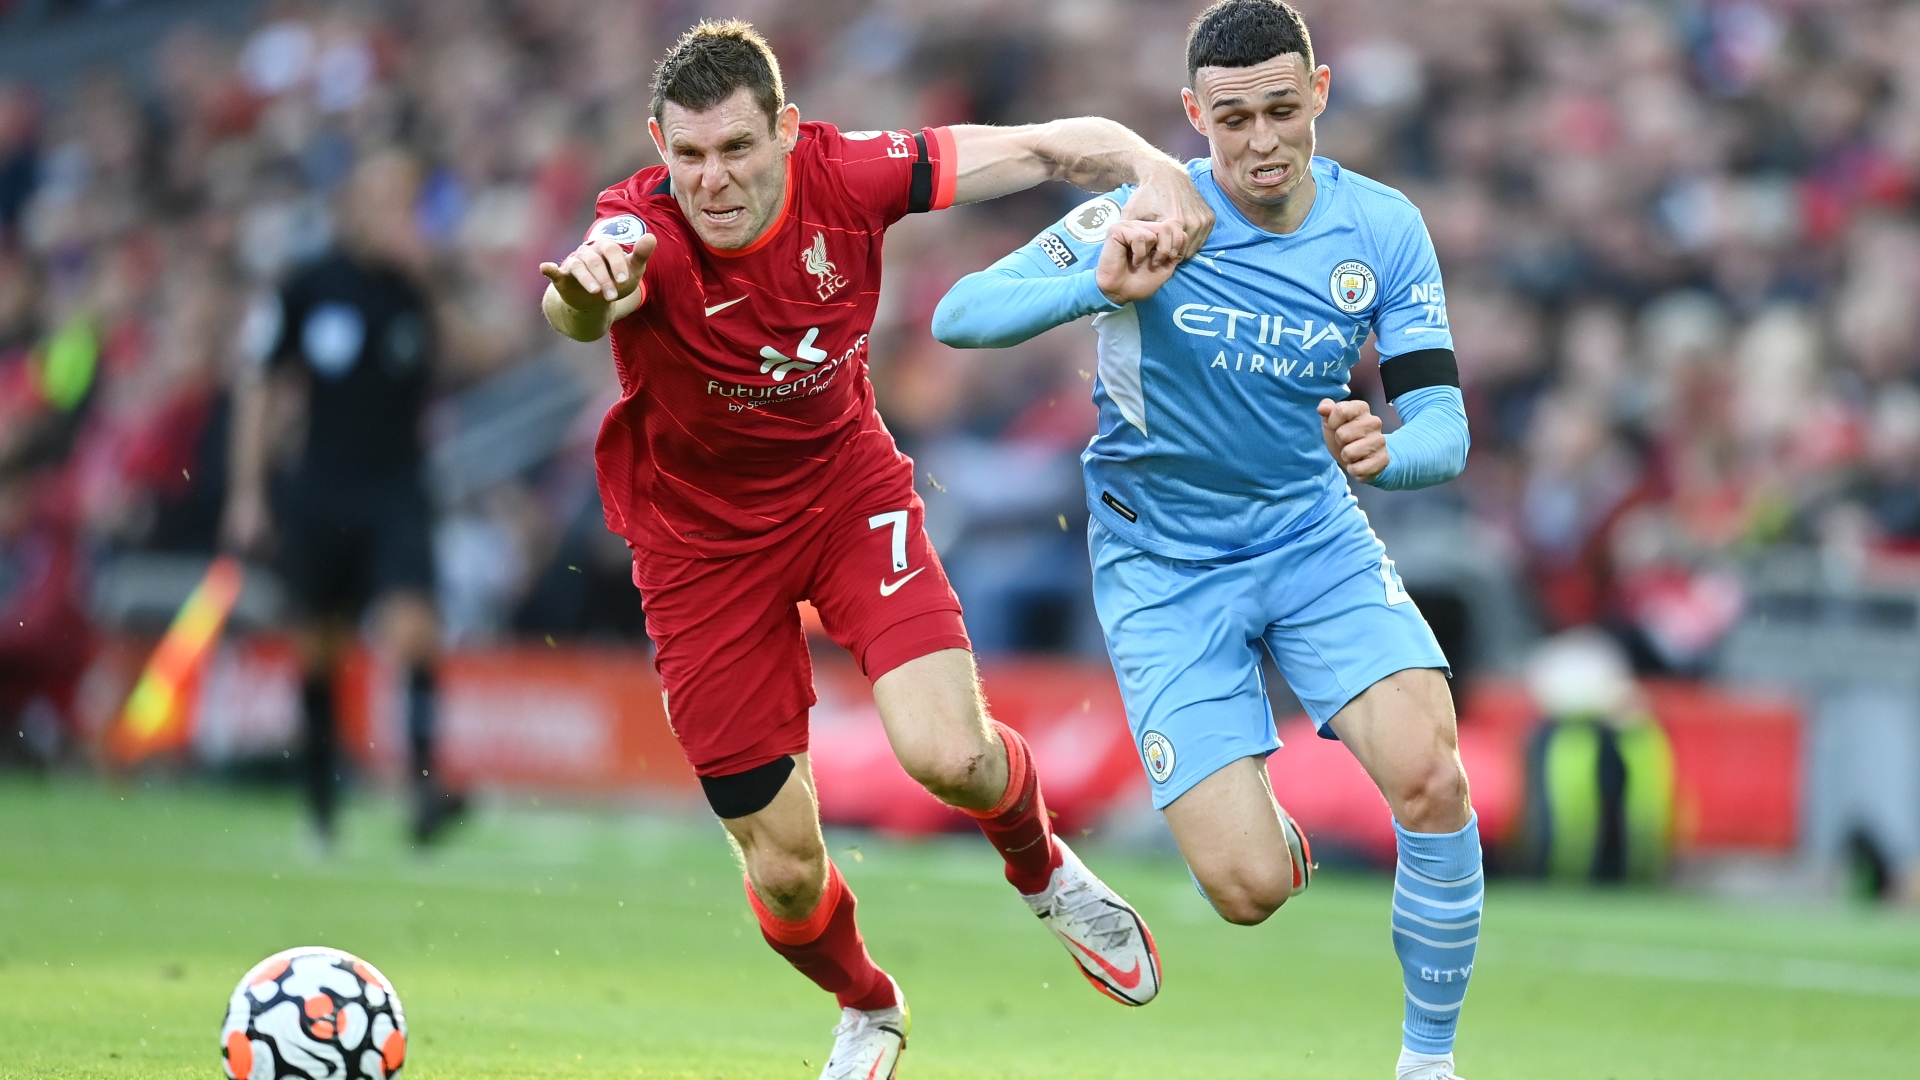 james milner names his best 11 of all time but is there room for mohamed salah?